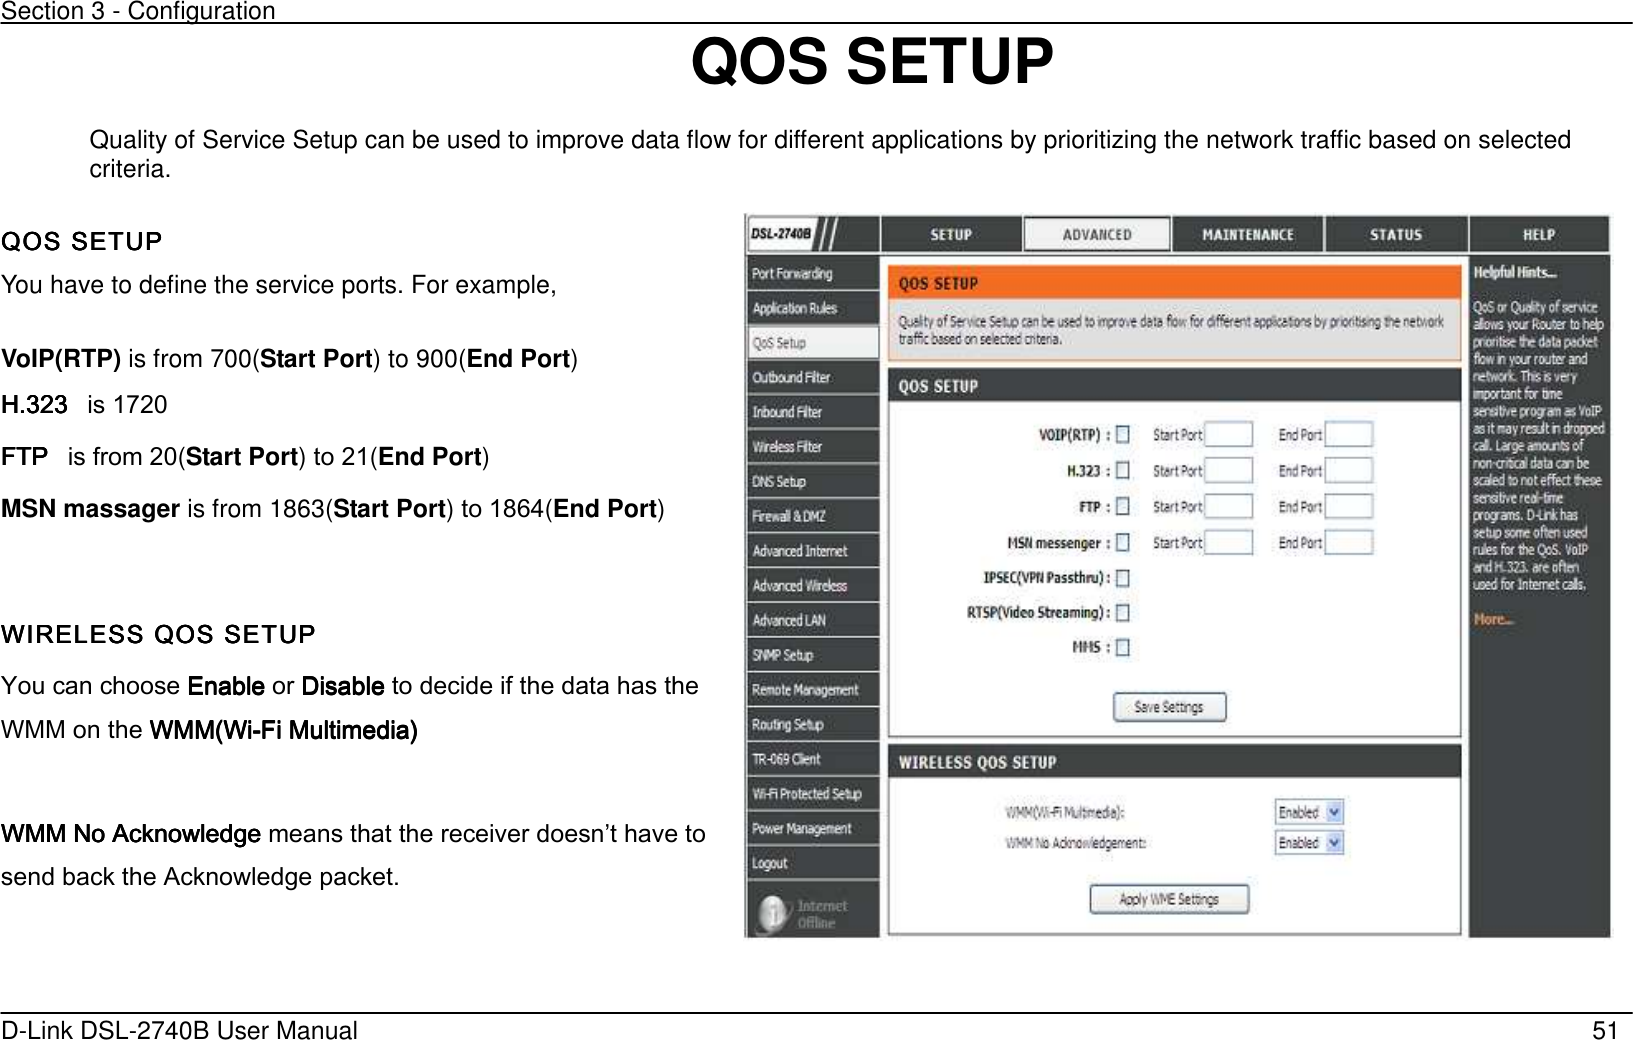 Section 3 - Configuration   D-Link DSL-2740B User Manual                                                  51                                 QOS SETUP     Quality of Service Setup can be used to improve data flow for different applications by prioritizing the network traffic based on selected criteria.  QOS SETUP QOS SETUP QOS SETUP QOS SETUP      You have to define the service ports. For example,    VoIP(RTP) is from 700(Start Port) to 900(End Port)   H.323 H.323 H.323 H.323      is 1720   FTP FTP FTP FTP      is from 20(Start Port) to 21(End Port) MSN massager is from 1863(Start Port) to 1864(End Port)   WIRELESS QOS SETUPWIRELESS QOS SETUPWIRELESS QOS SETUPWIRELESS QOS SETUP You can choose EnableEnableEnableEnable or DisableDisableDisableDisable to decide if the data has the WMM on the WMM(WiWMM(WiWMM(WiWMM(Wi----Fi Multimedia’Fi Multimedia’Fi Multimedia’Fi Multimedia’        WMWMWMWMM No Acknowledge M No Acknowledge M No Acknowledge M No Acknowledge means that the receiver doesnt have to send back the Acknowledge packet.    